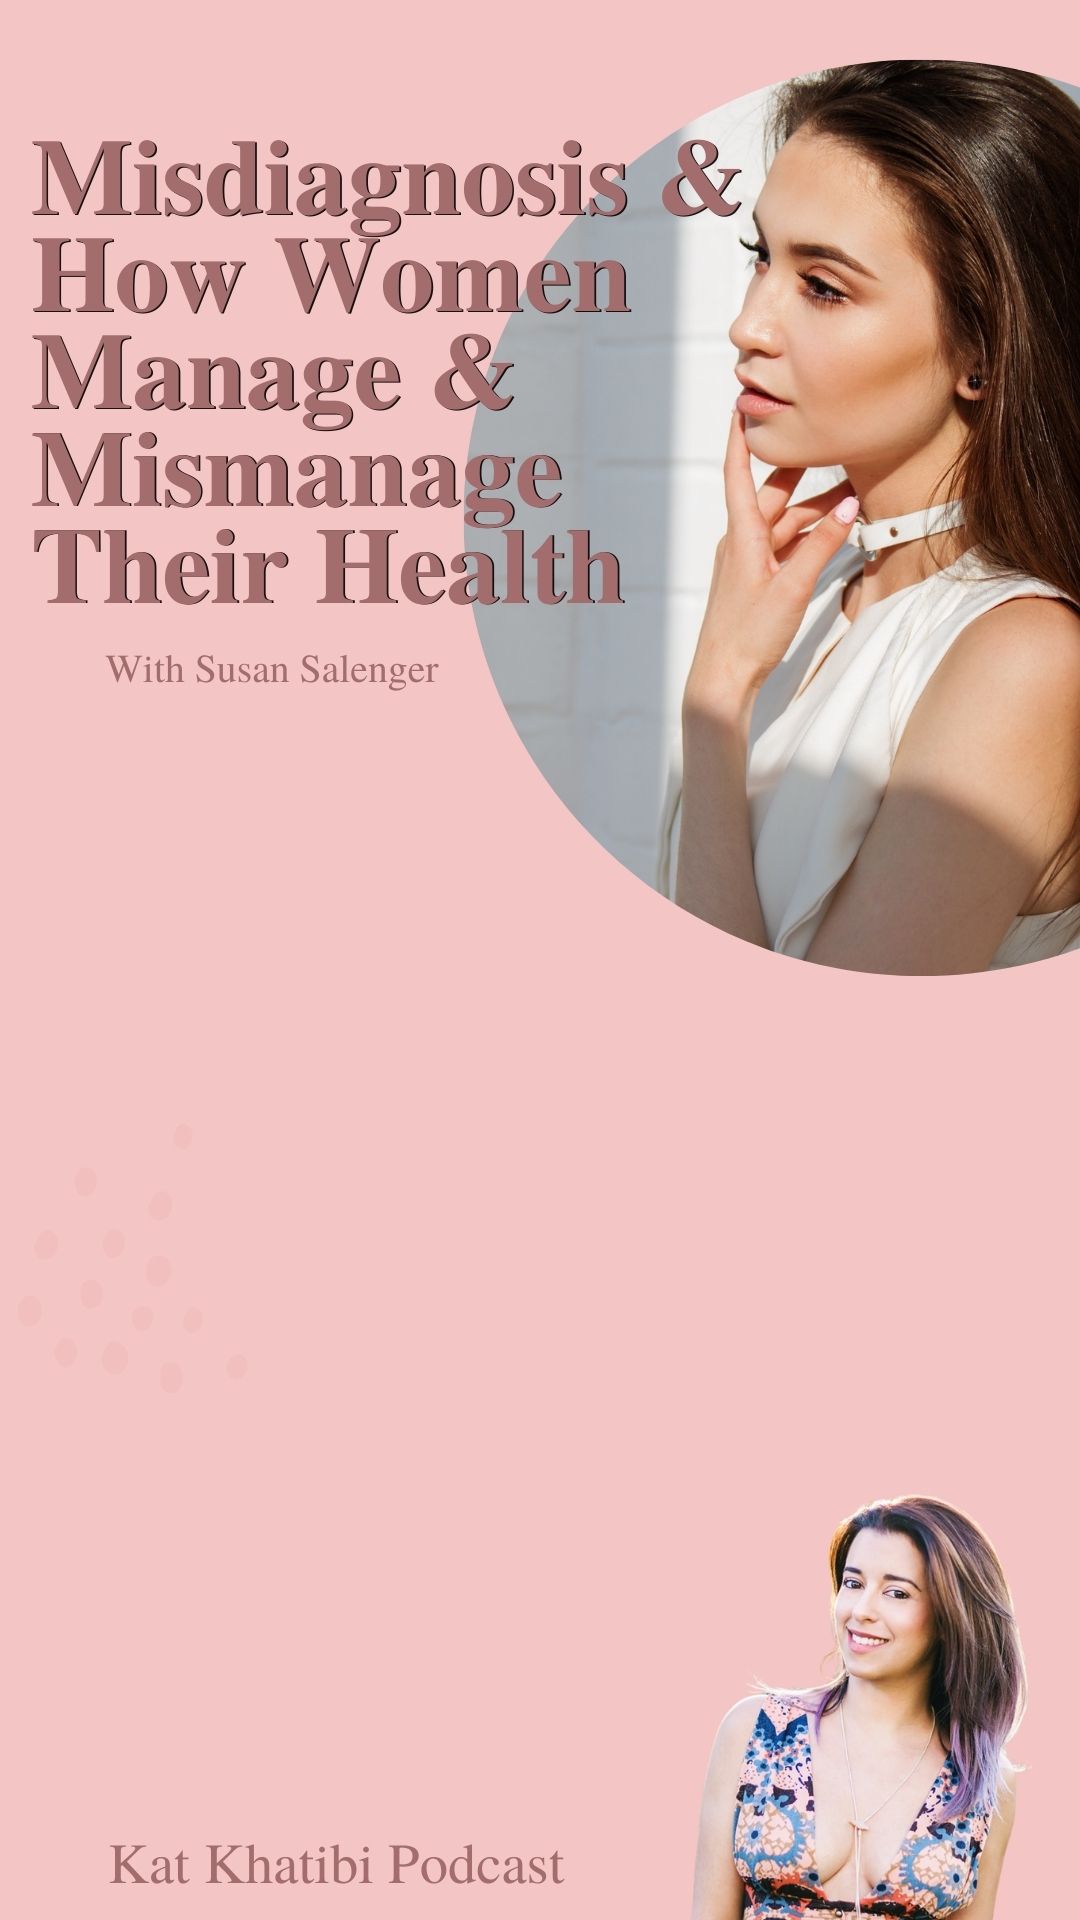 Misdiagnosis and How Women Manage & Mismanage Their Health with Susan Salenger